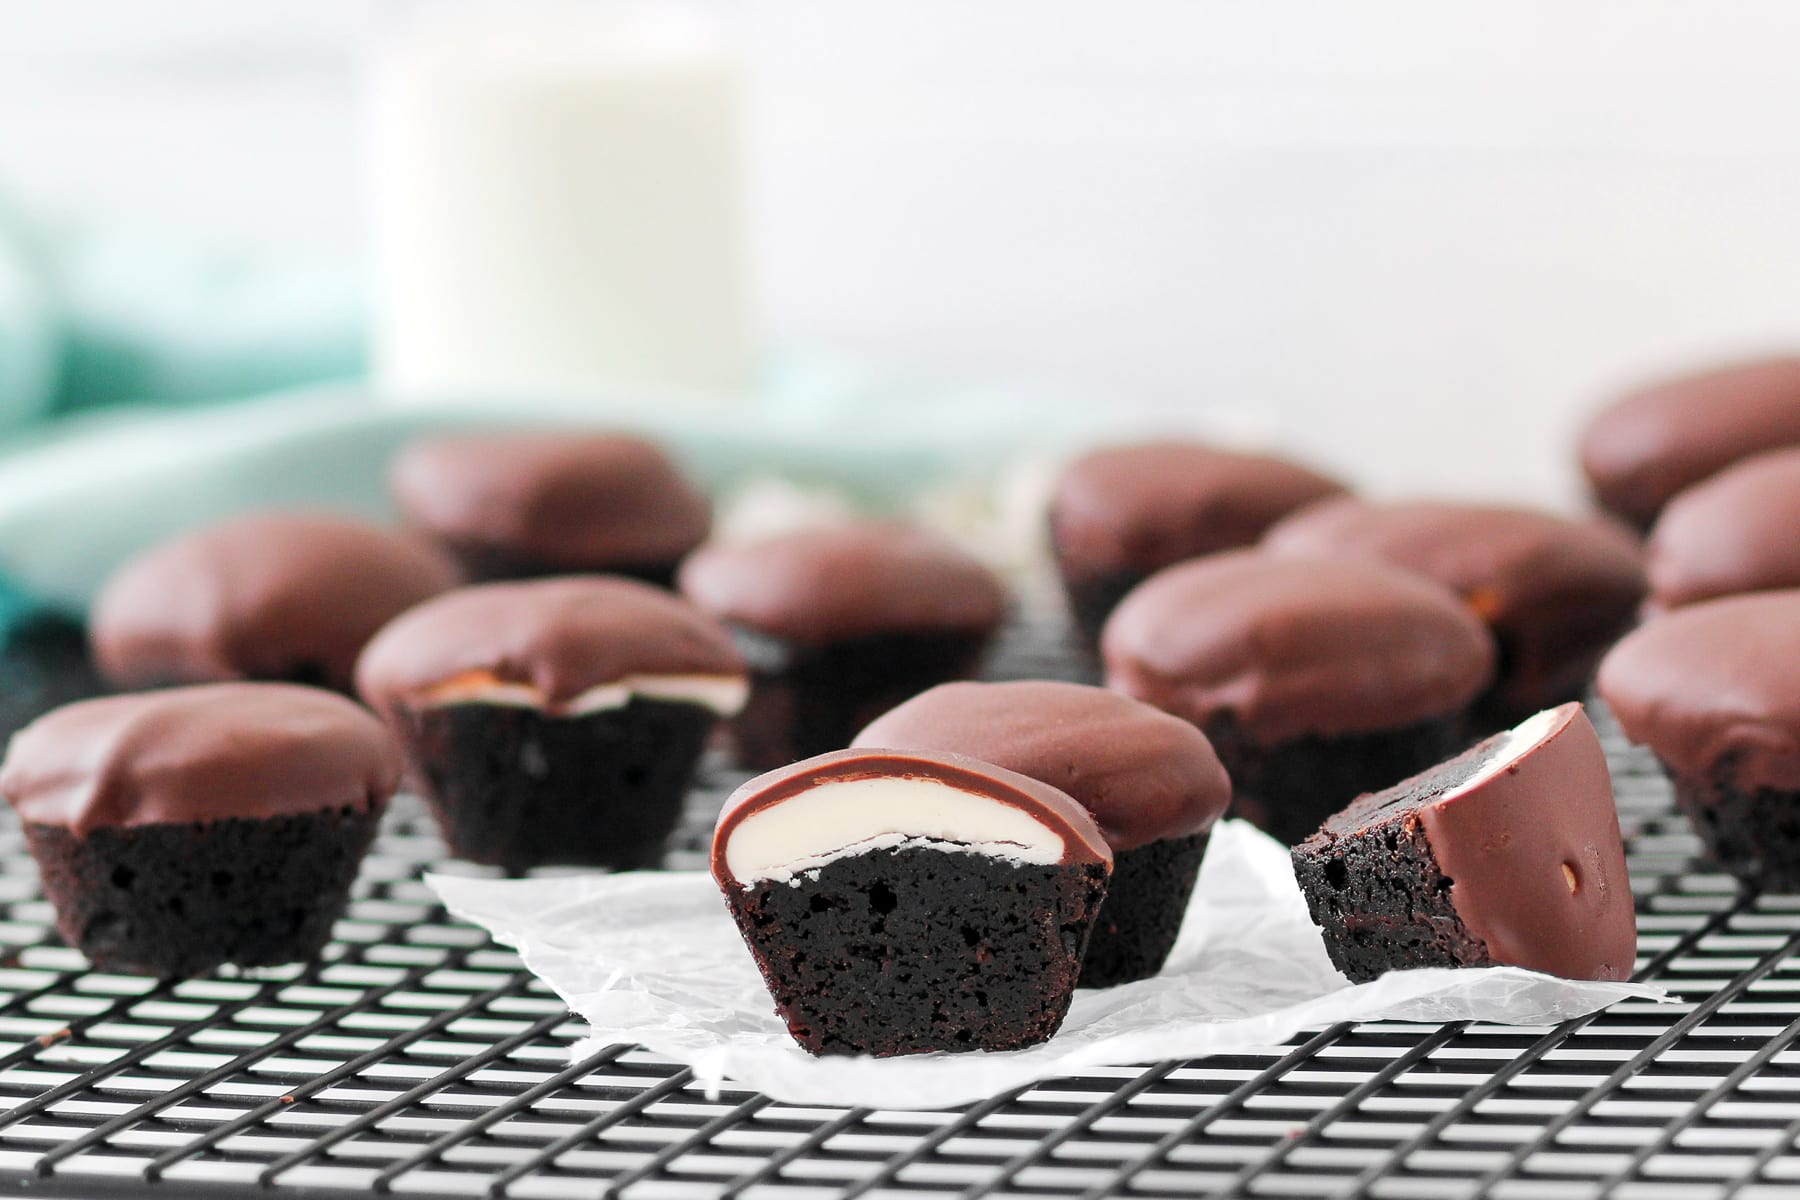 Brownie Bites - Confessions of a Baking Queen